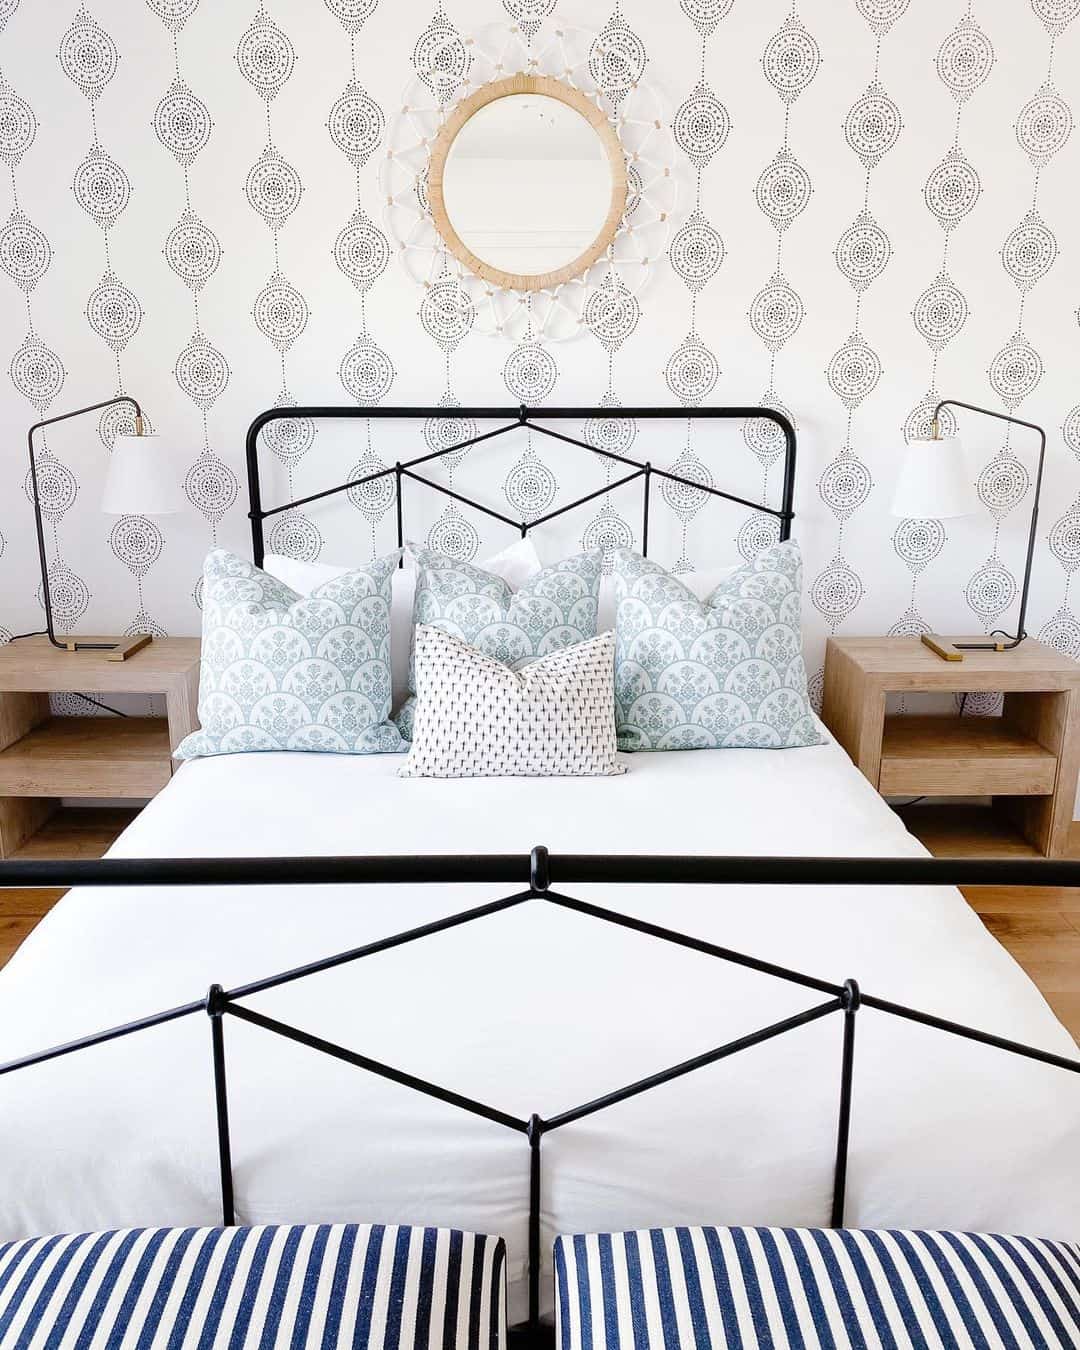 26 Modern Bedroom Wallpaper Ideas to Amplify Your Space